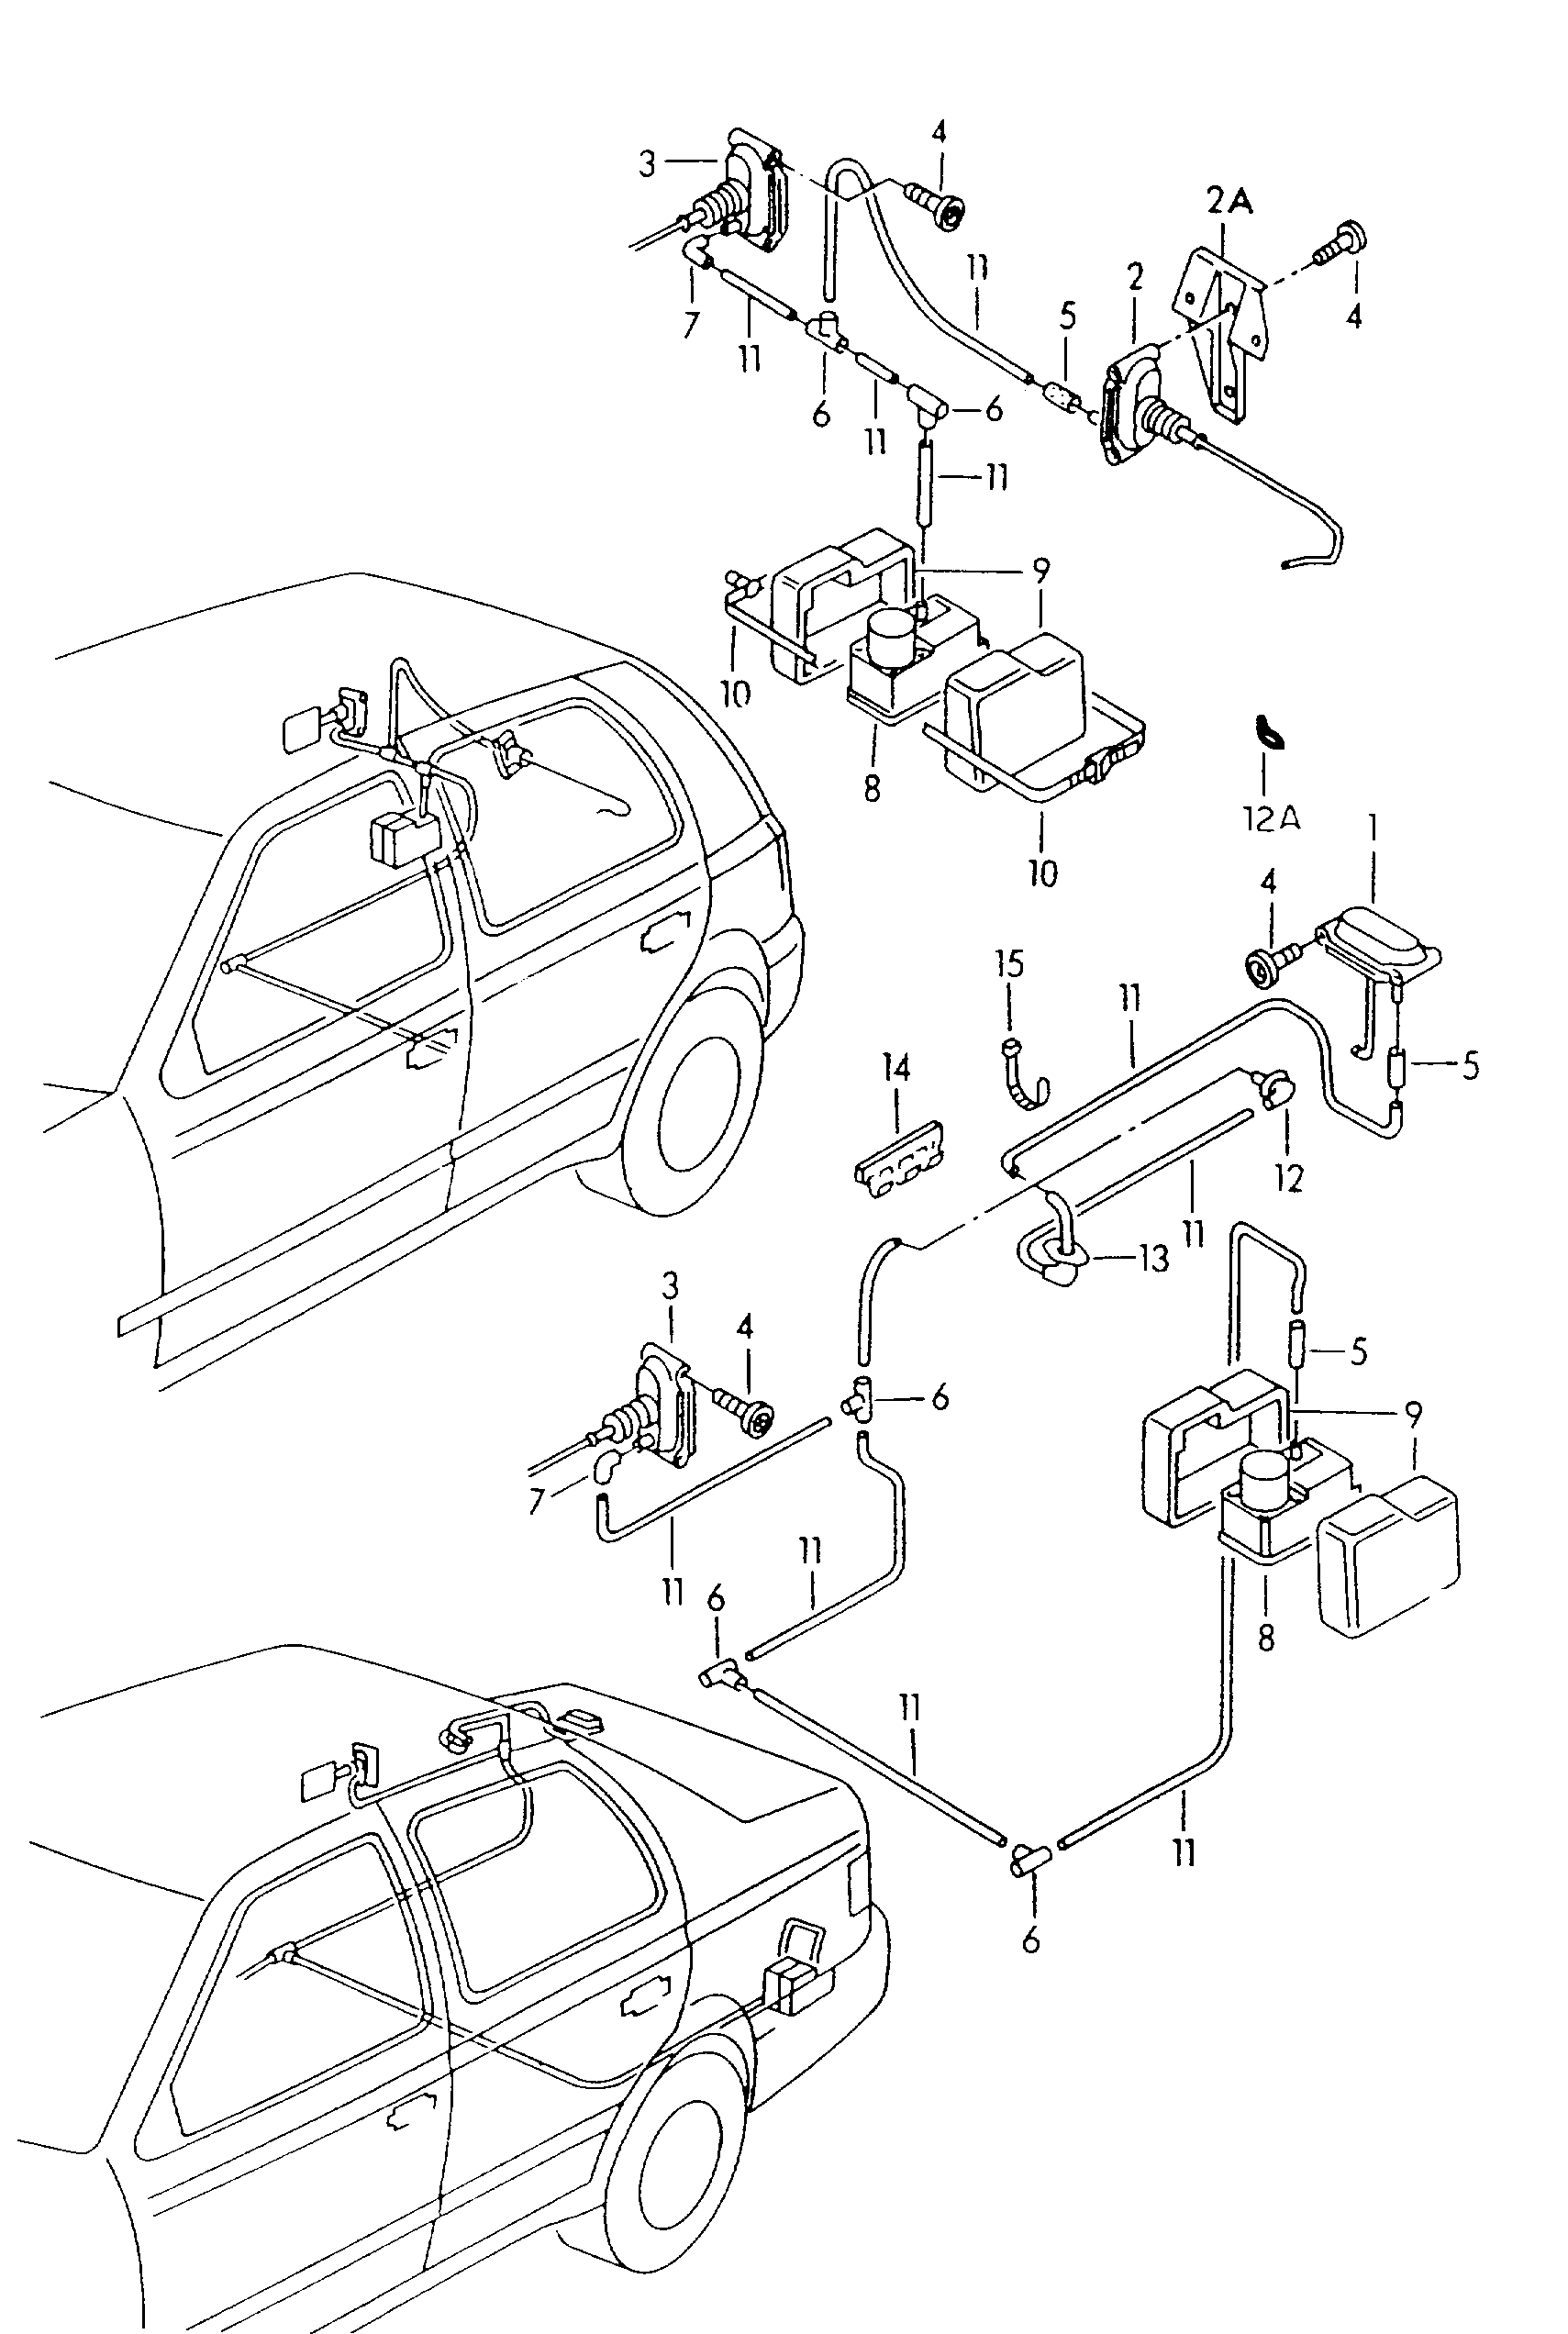 central locking system for<br>tailgate  and fuel filler<br>flap  - Jetta - jem